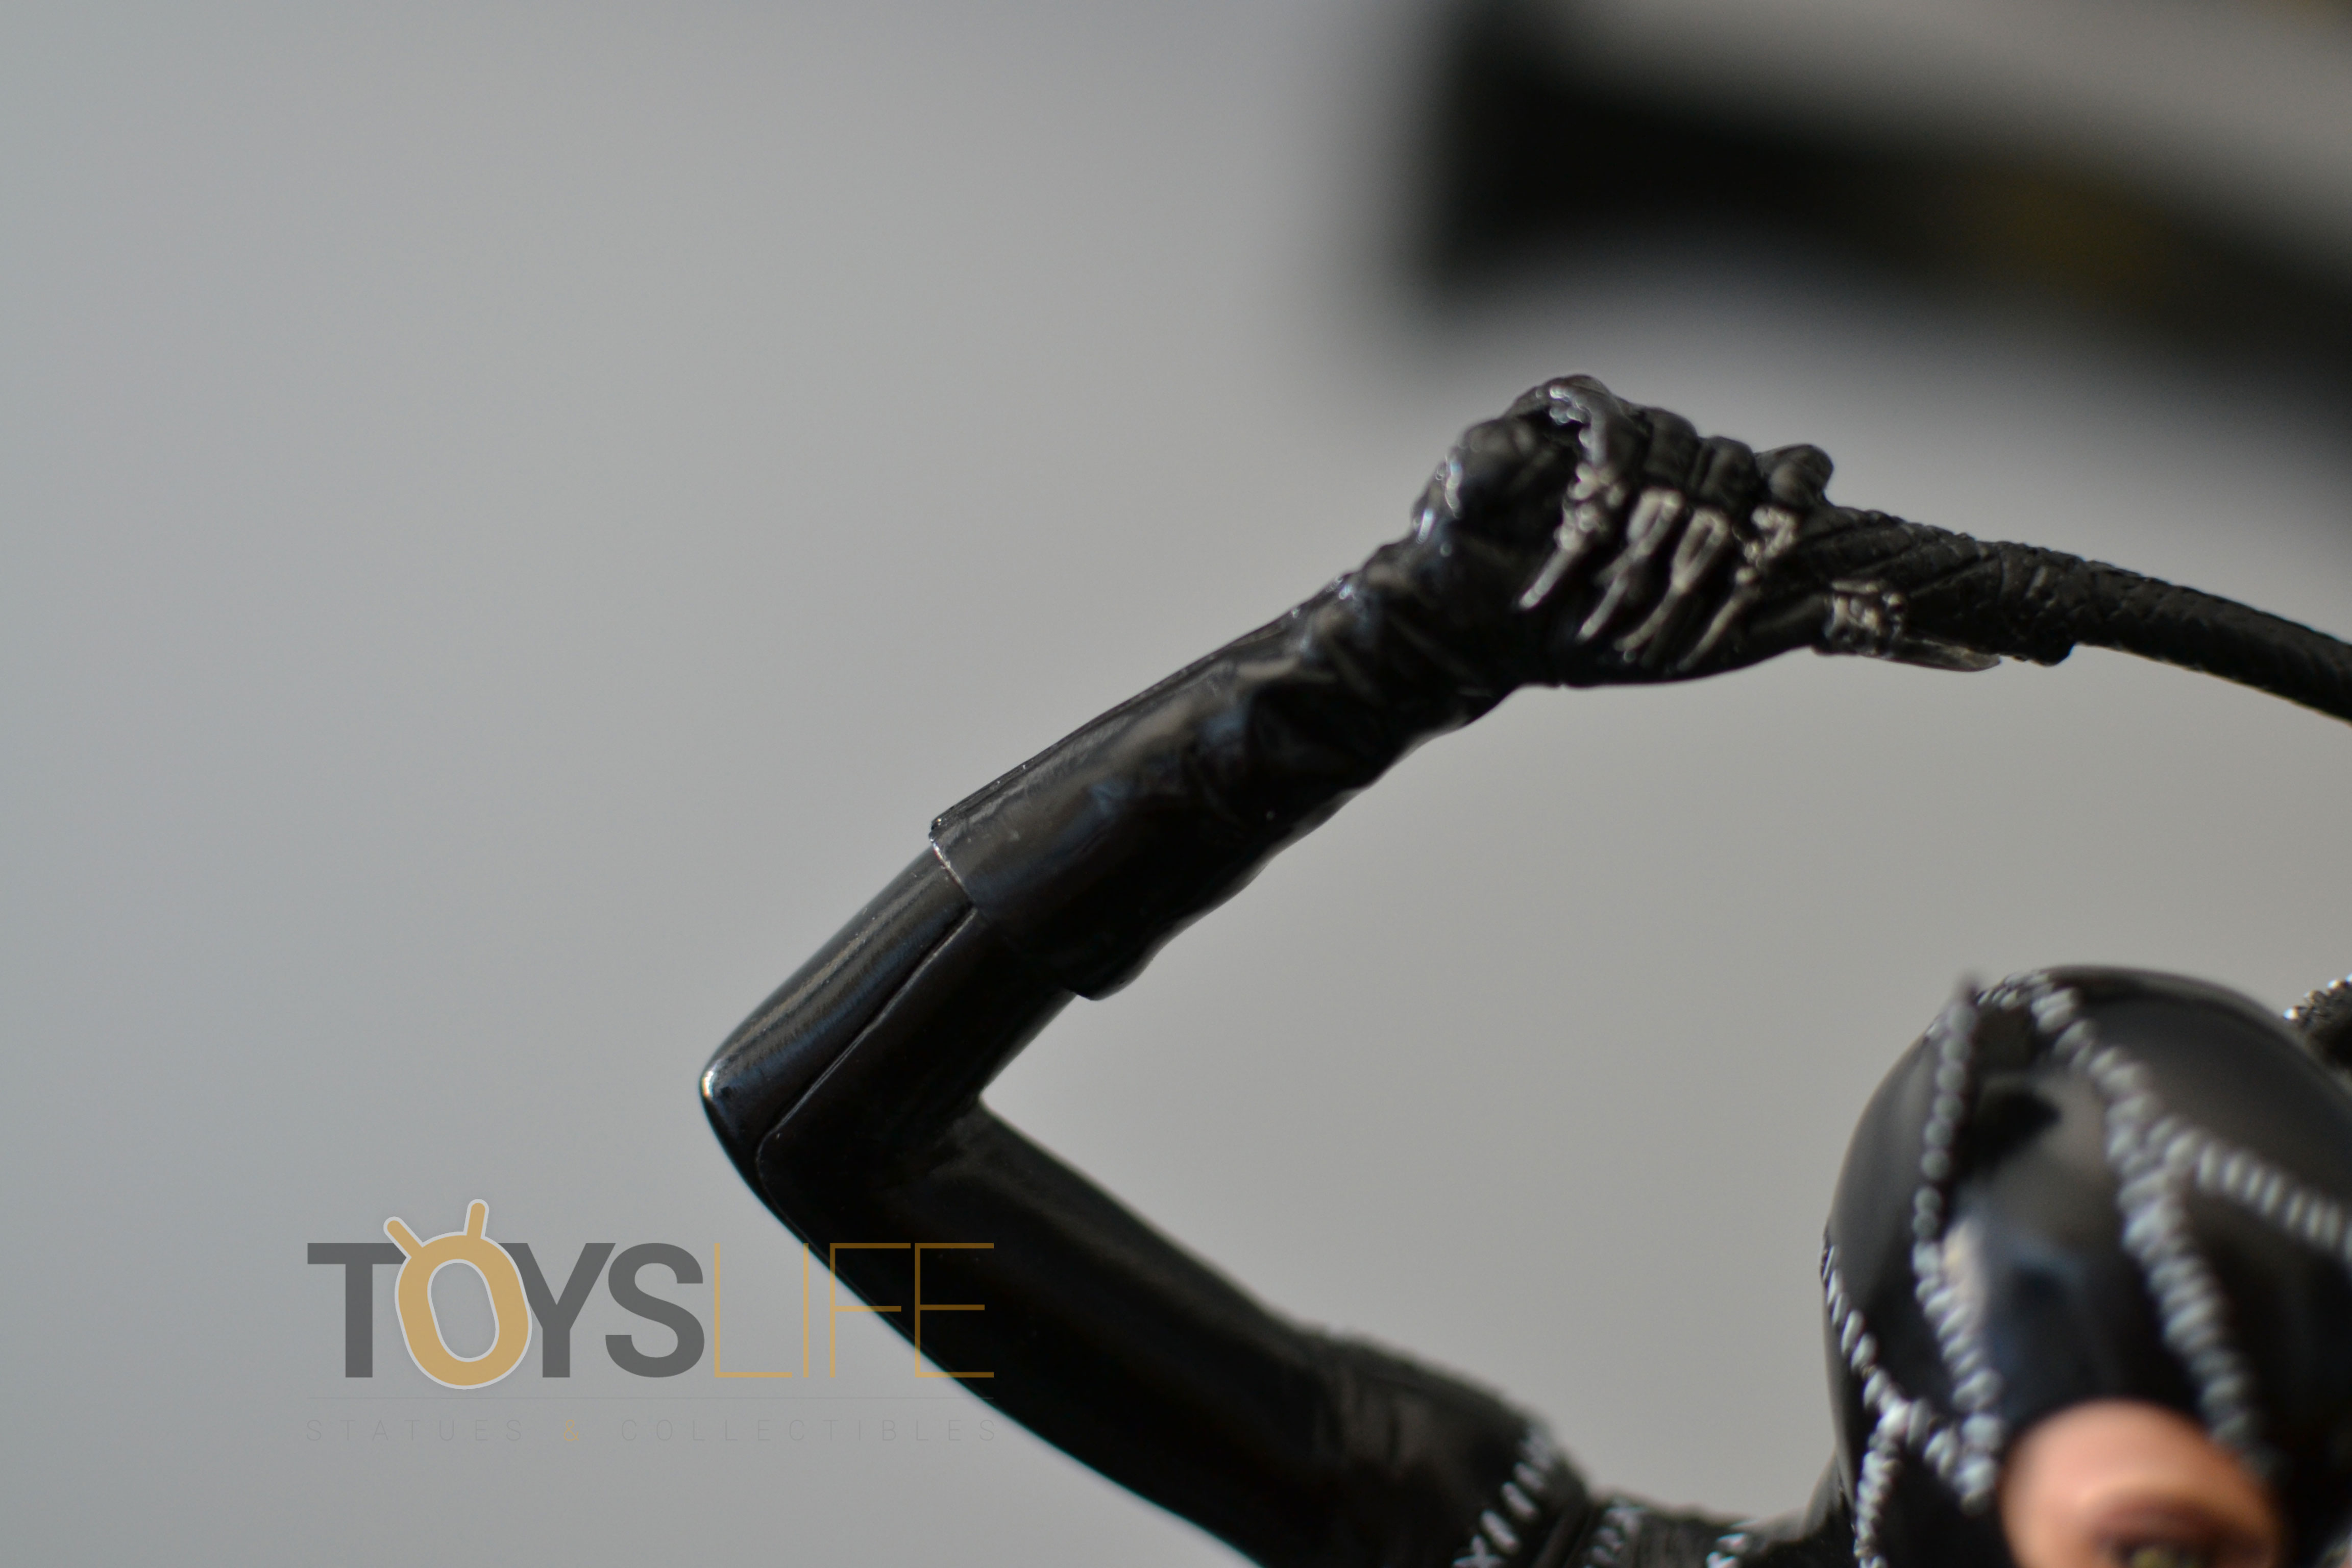 tweeterhead-catwoman-michelle-pfeiffer-maquette-toyslife-review-13